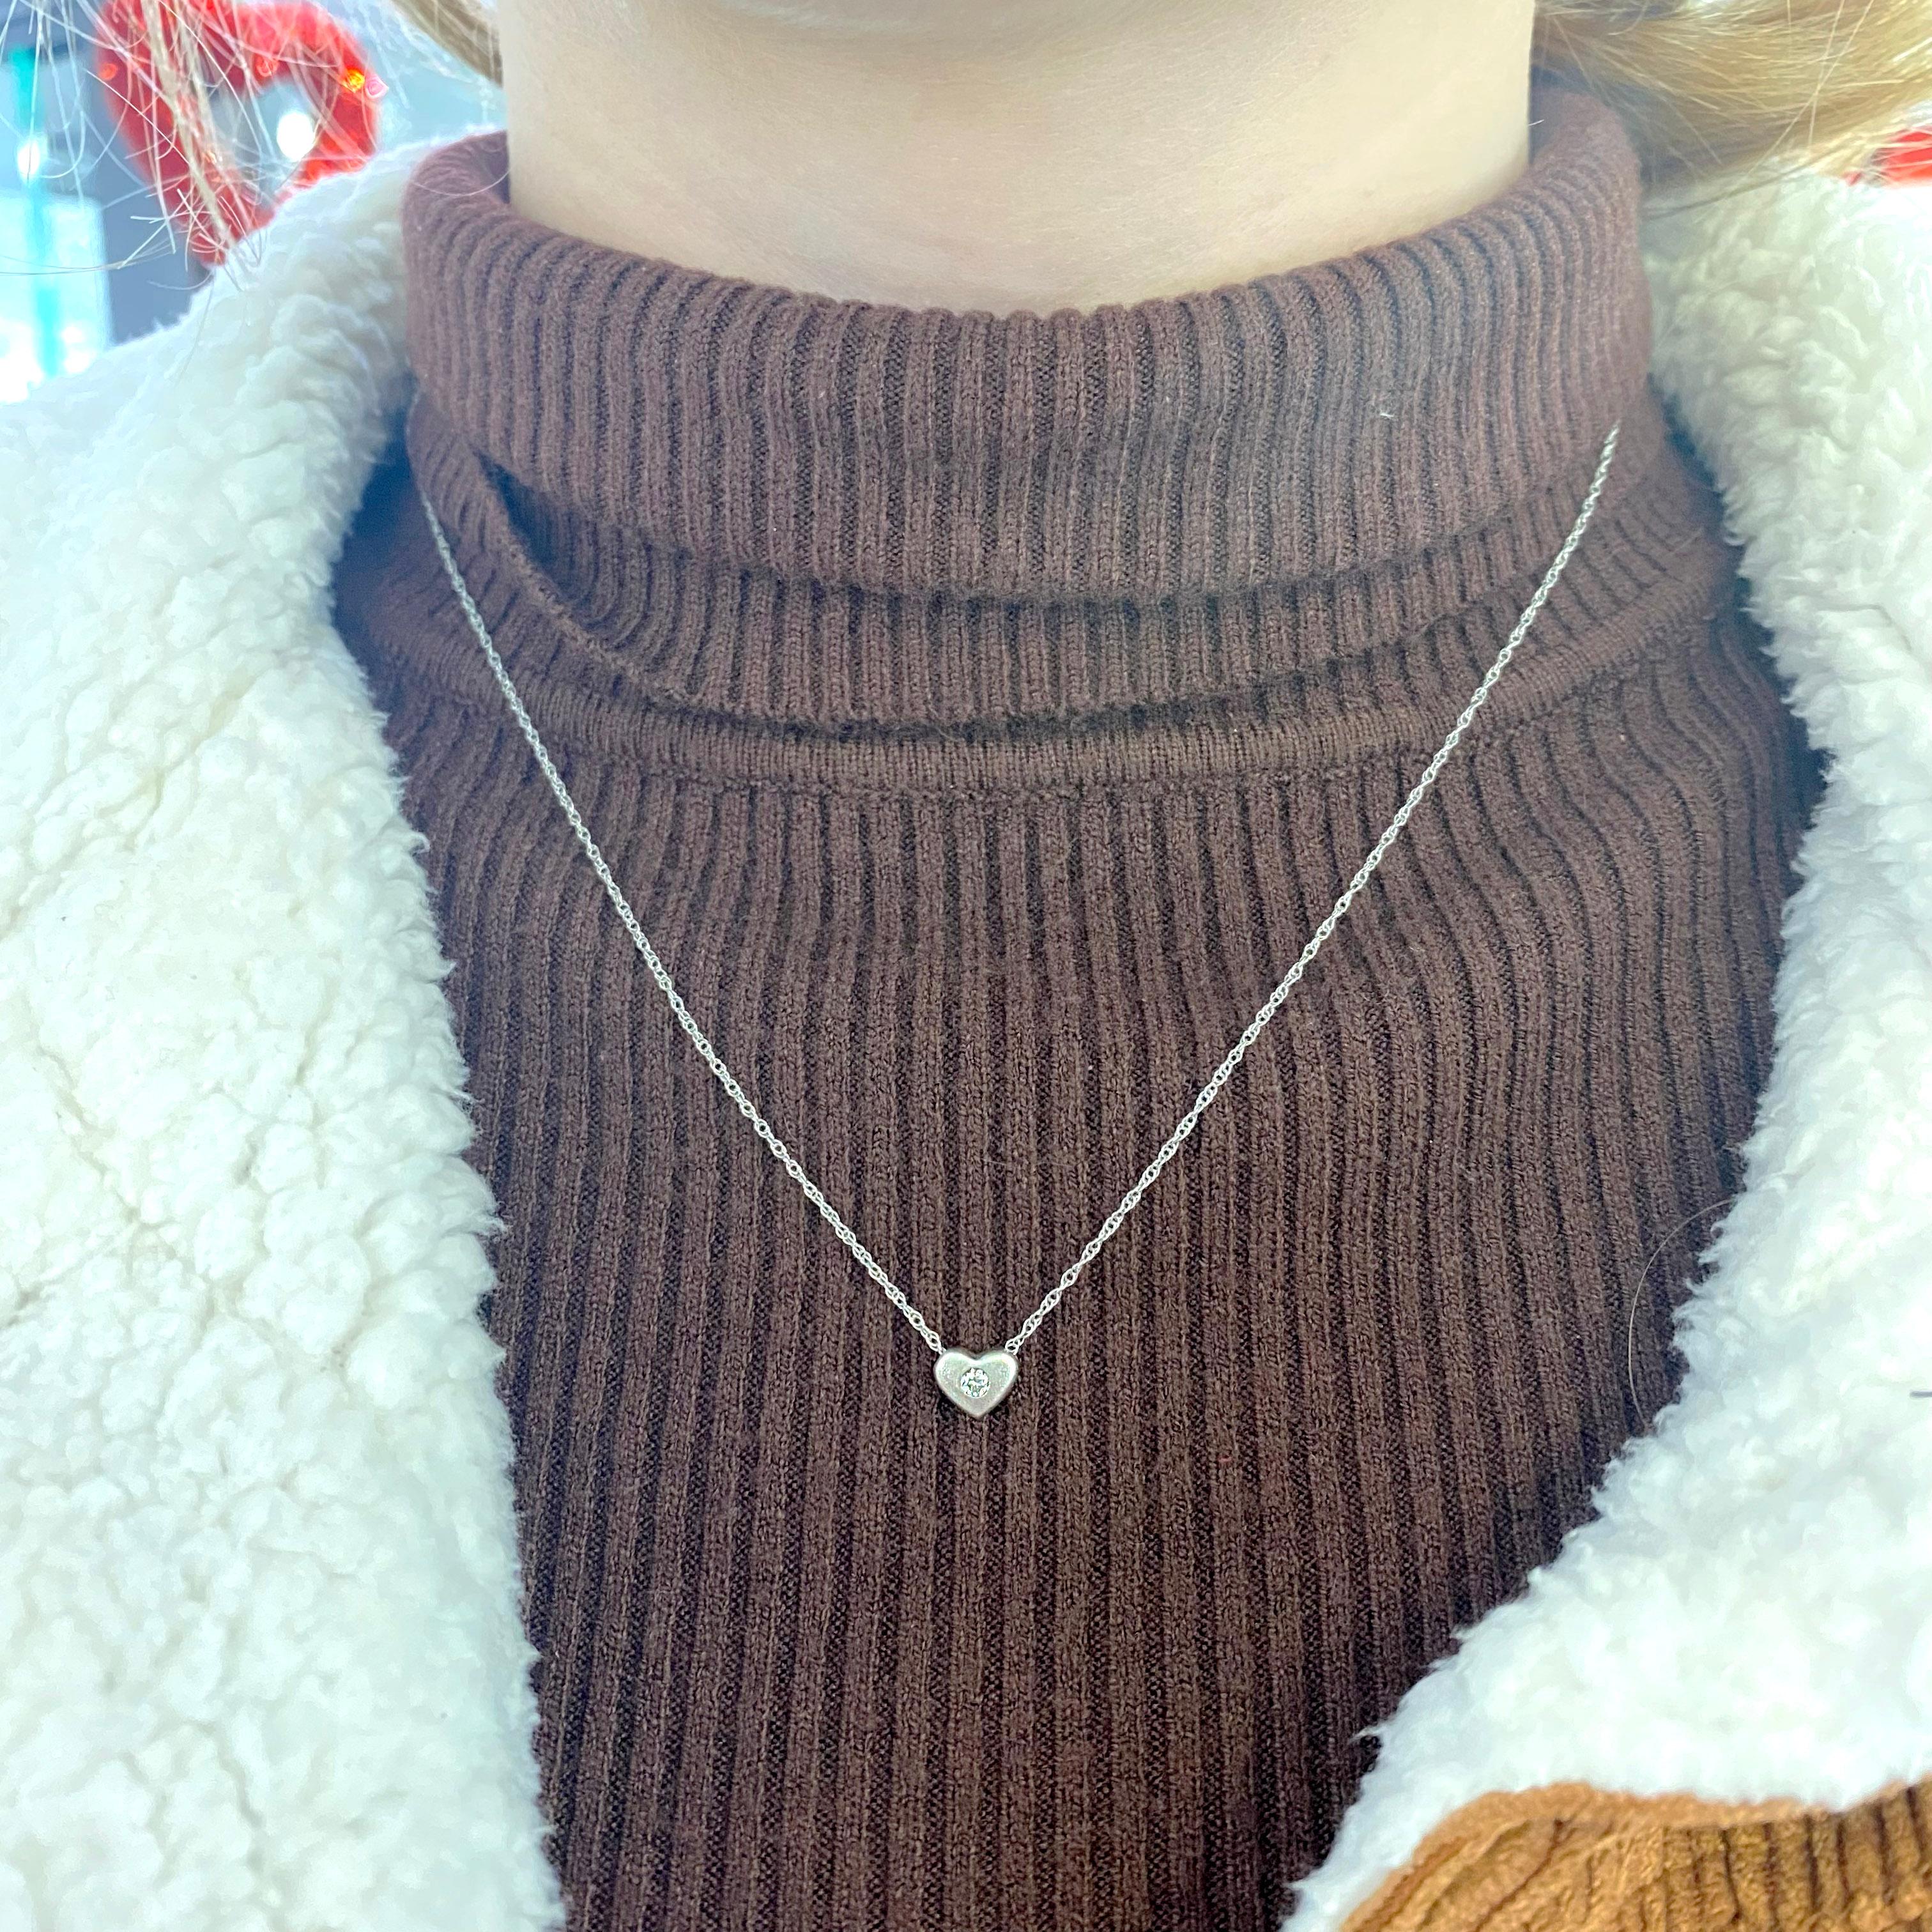 If you have been looking for the perfect gift for a loved one you've found it. This adorable necklace can enhance any outfit and every time they wear it they will think of you. Make them feel as special as they are by giving them the necklace they